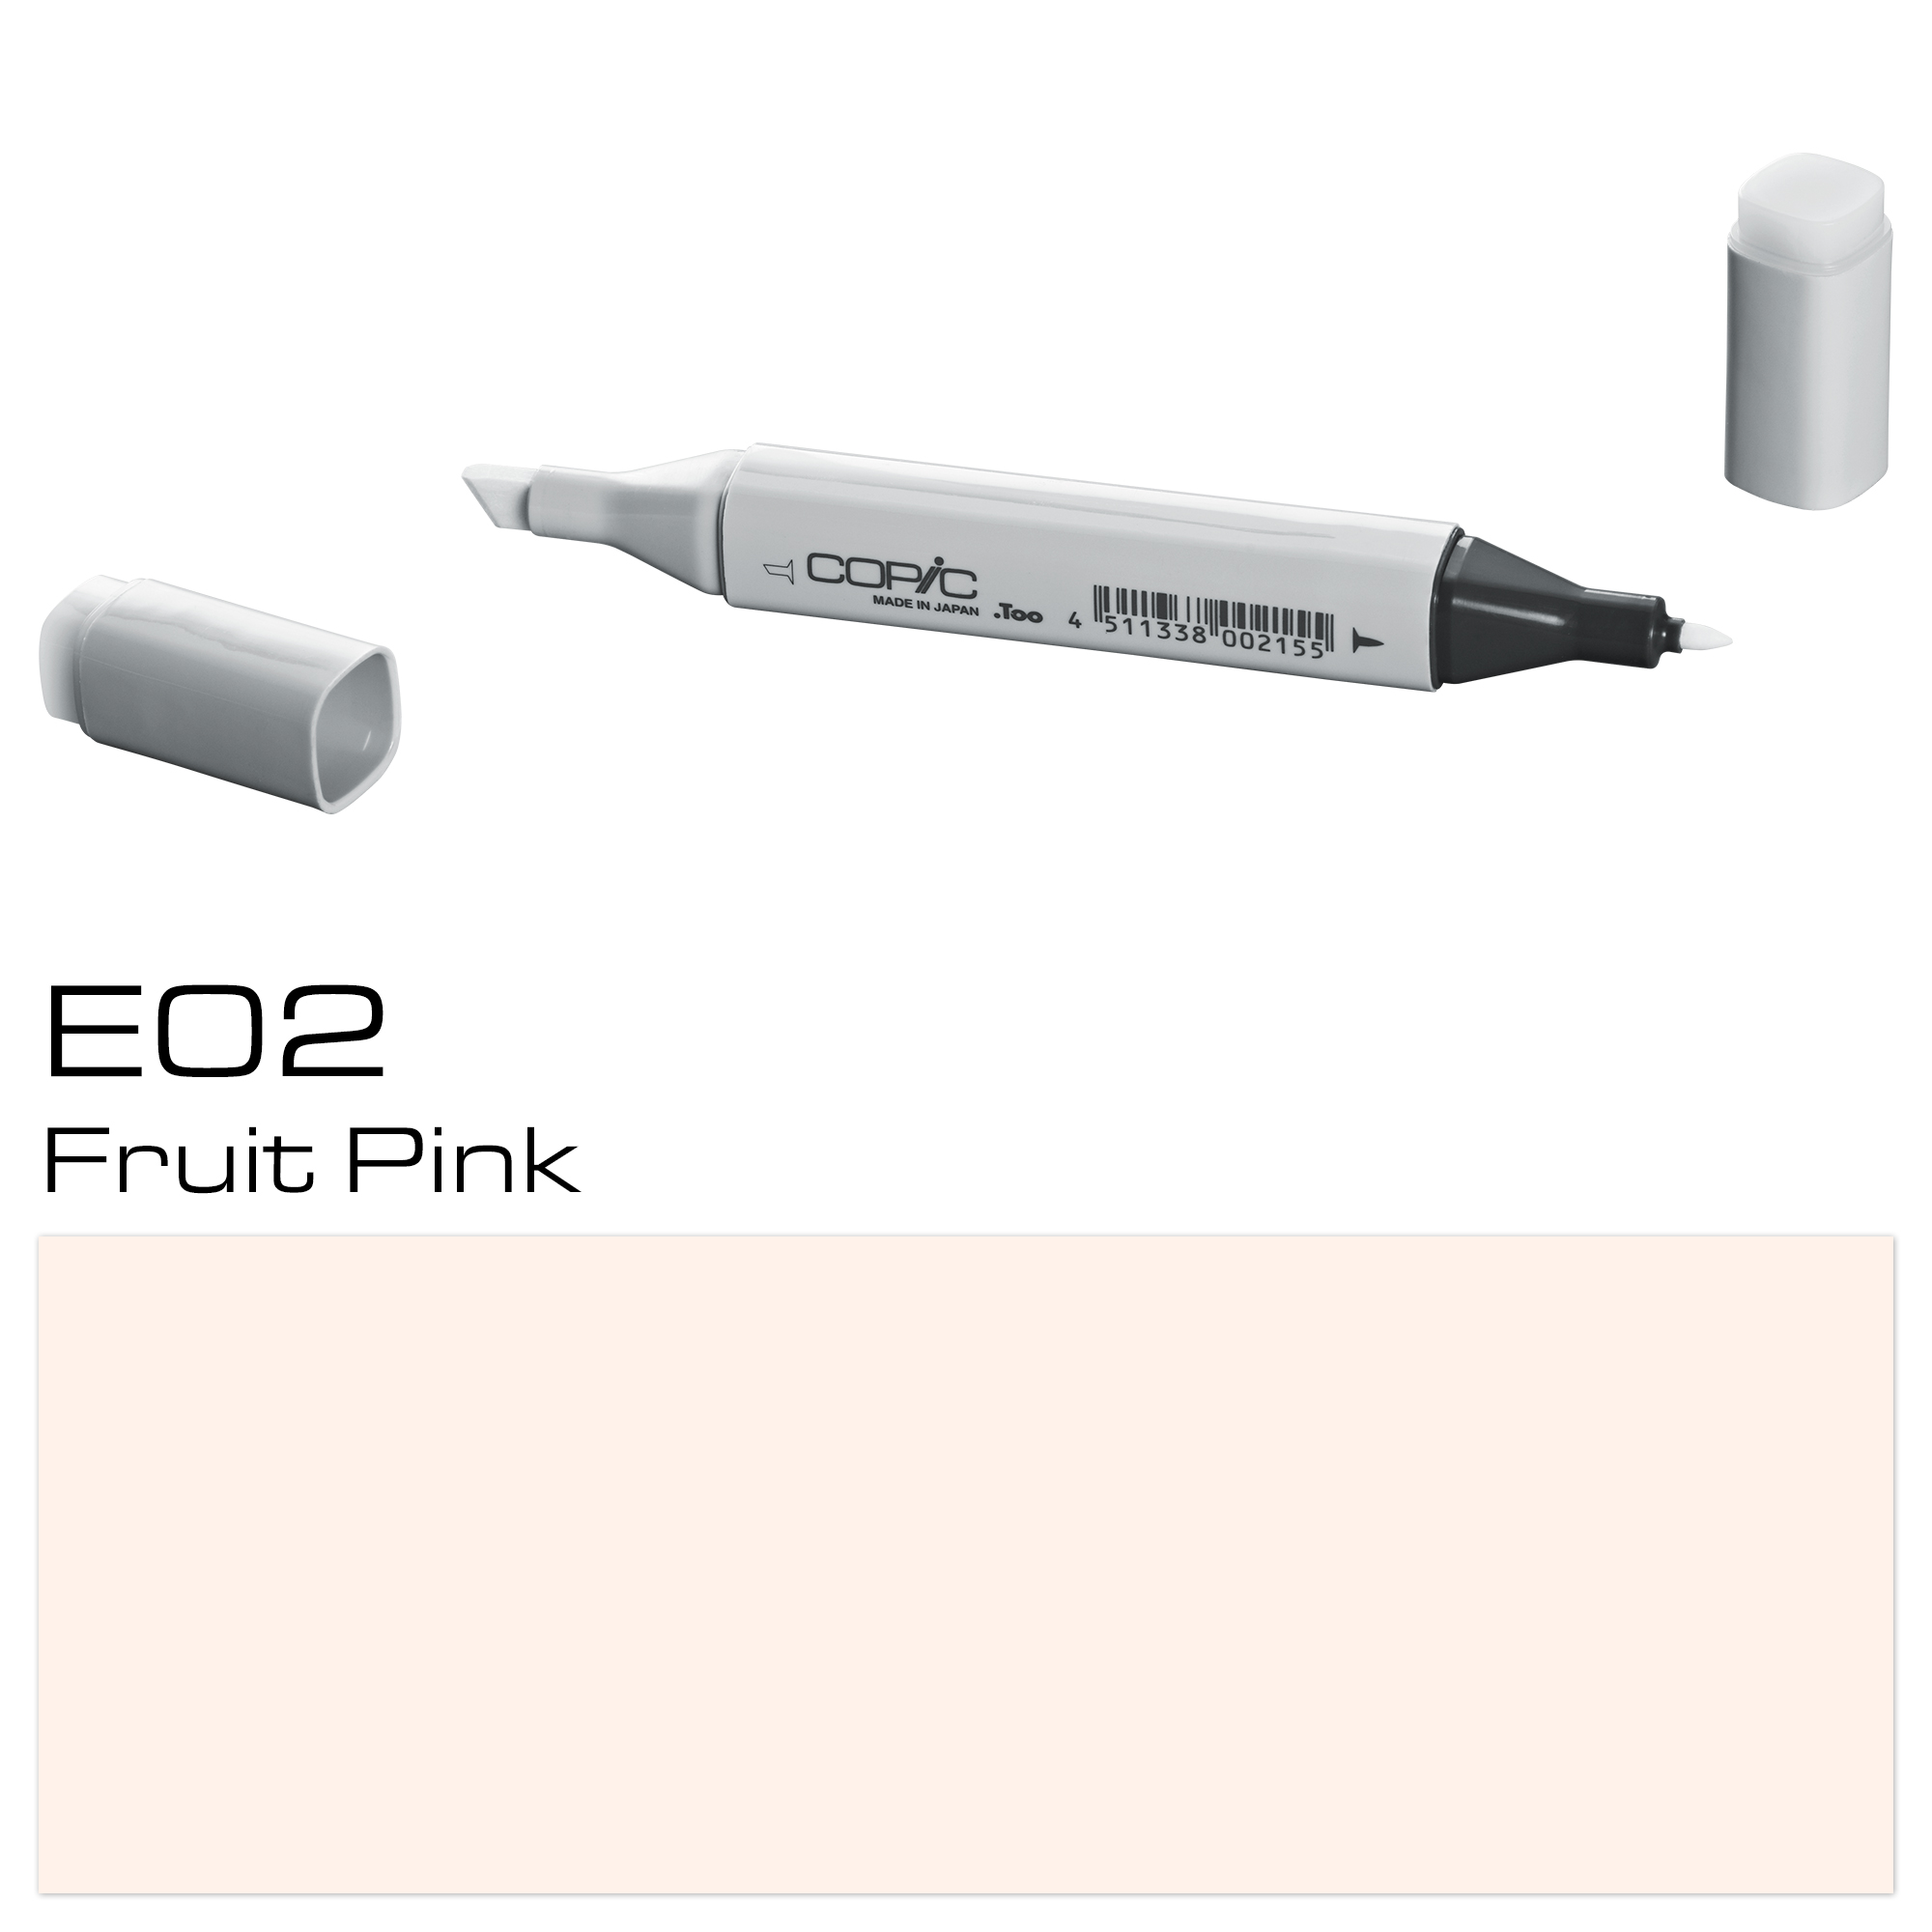 COPIC MARKER FRUIT PINK E02